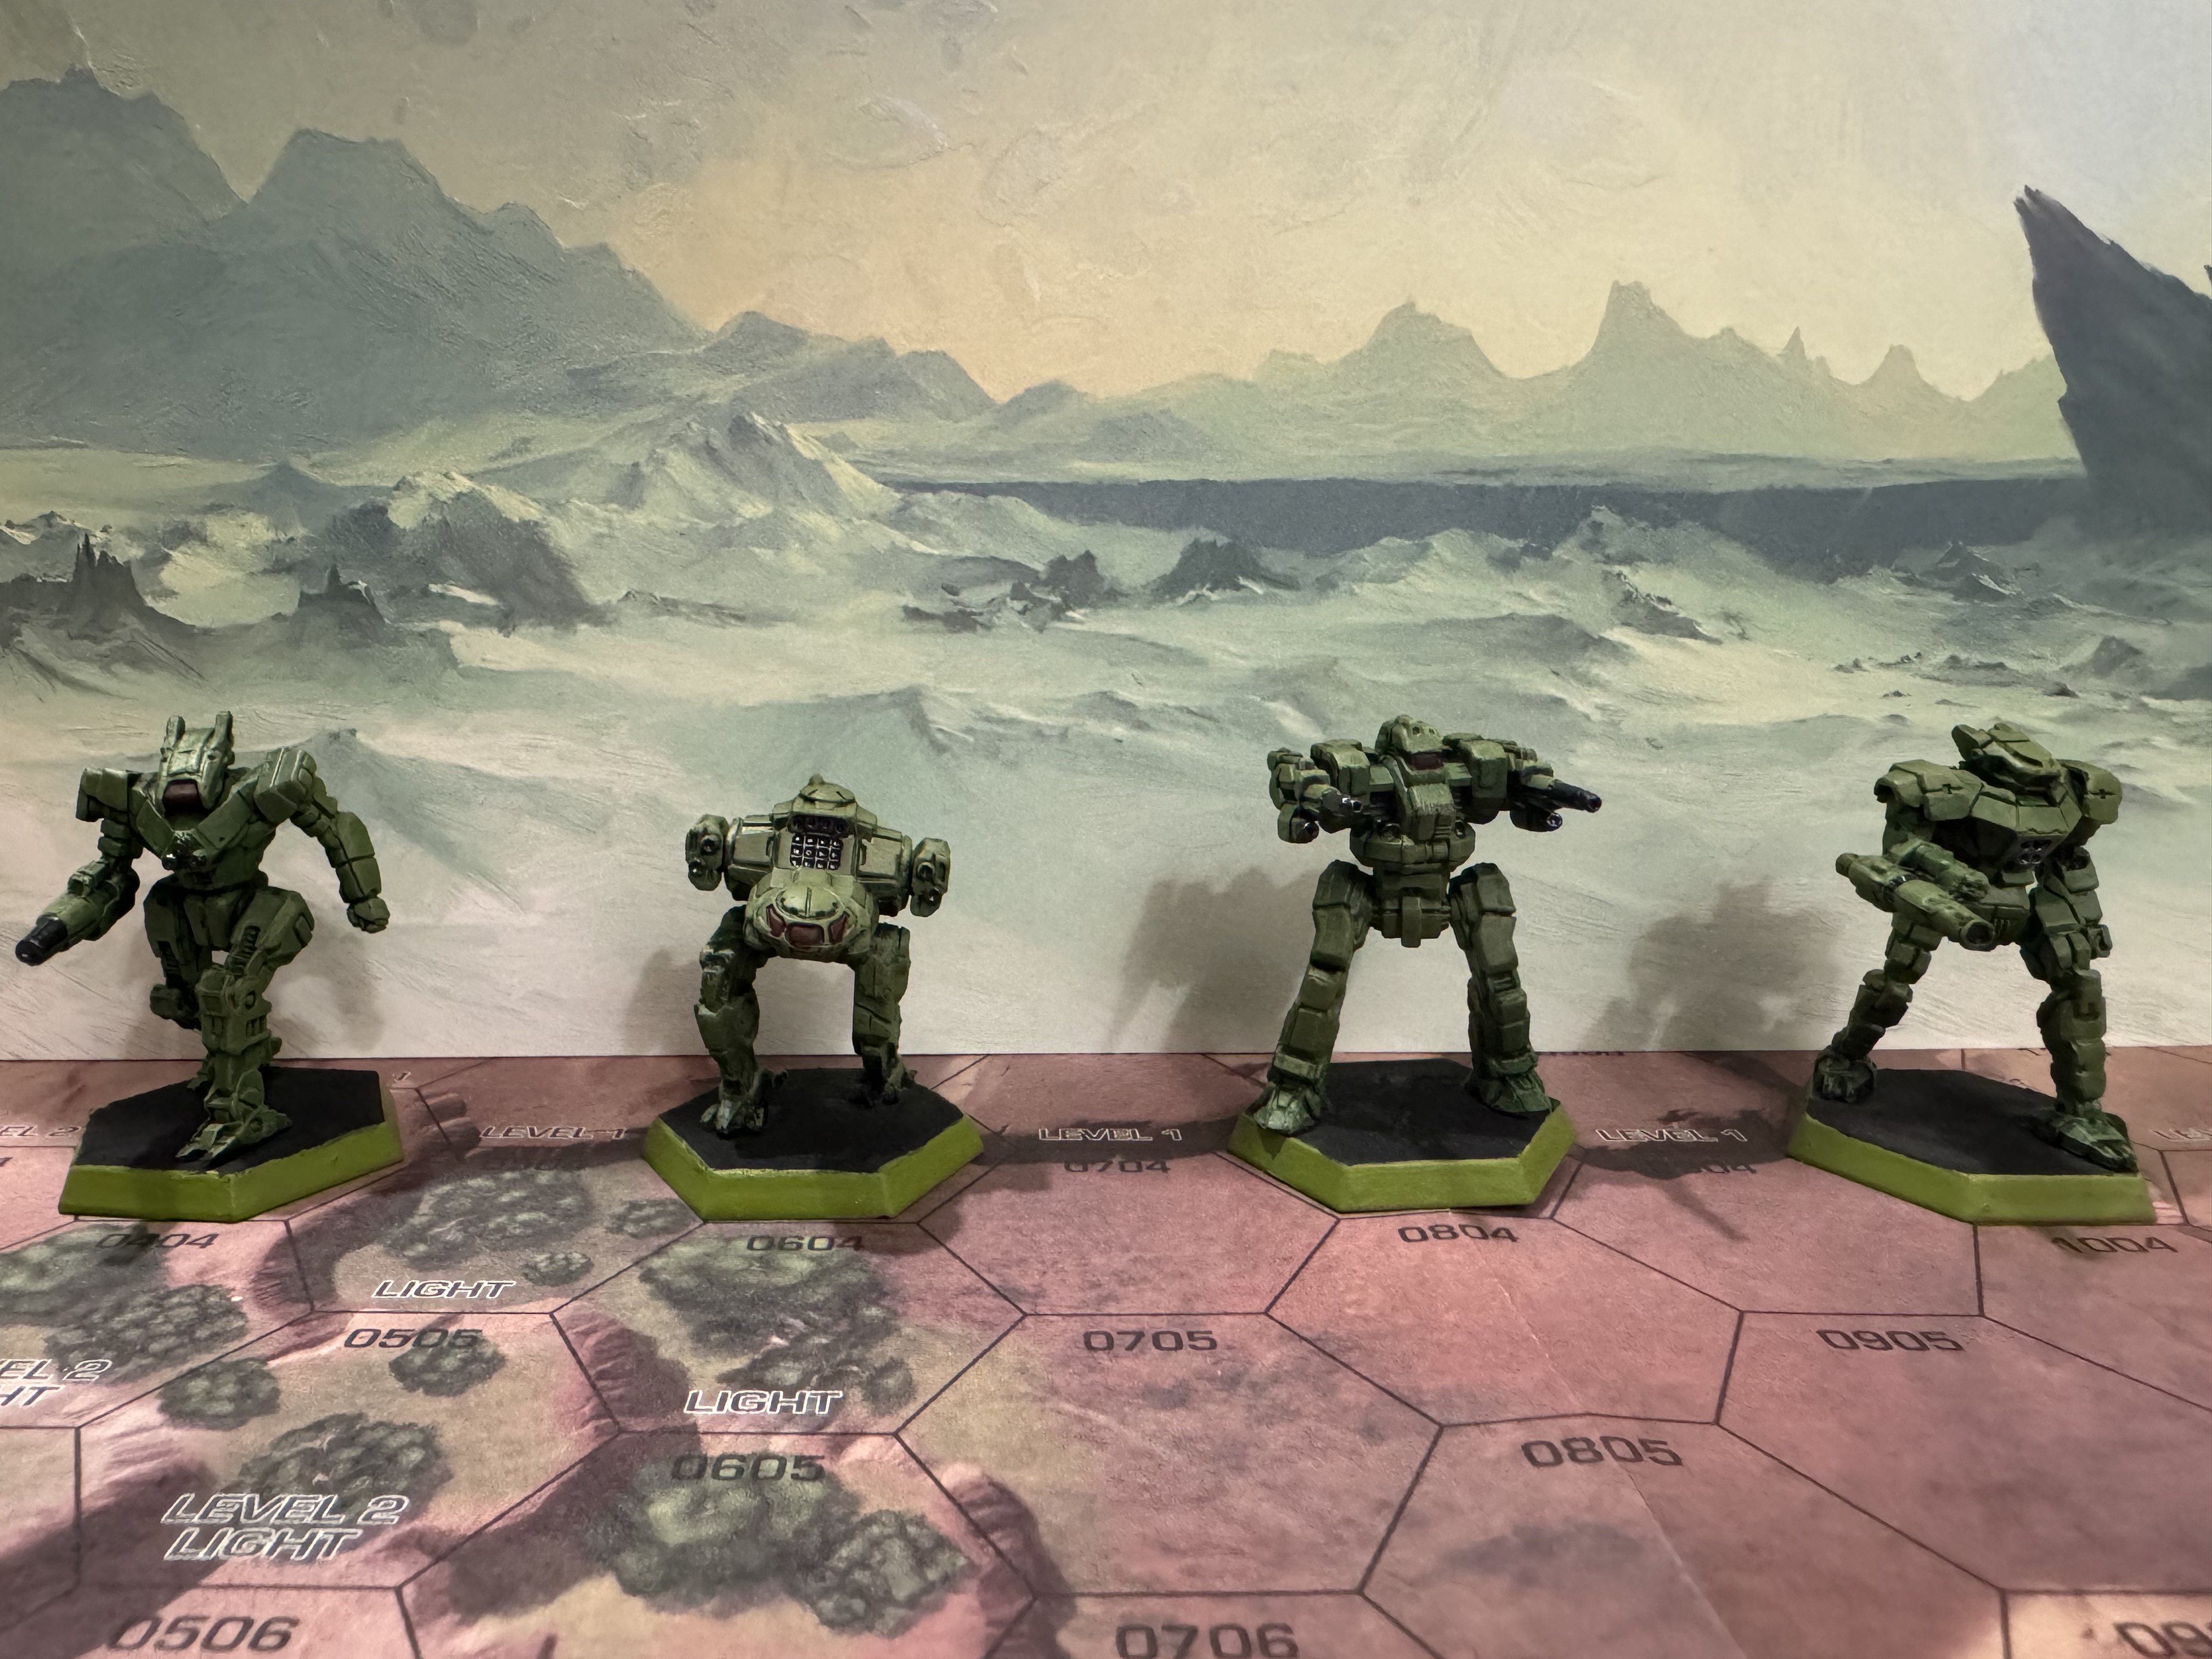 The Inner Sphere Assault Lance painted in military green/brown with red tinted windows and metal weaponry. They are displayed on a hex map with an ice world backdrop